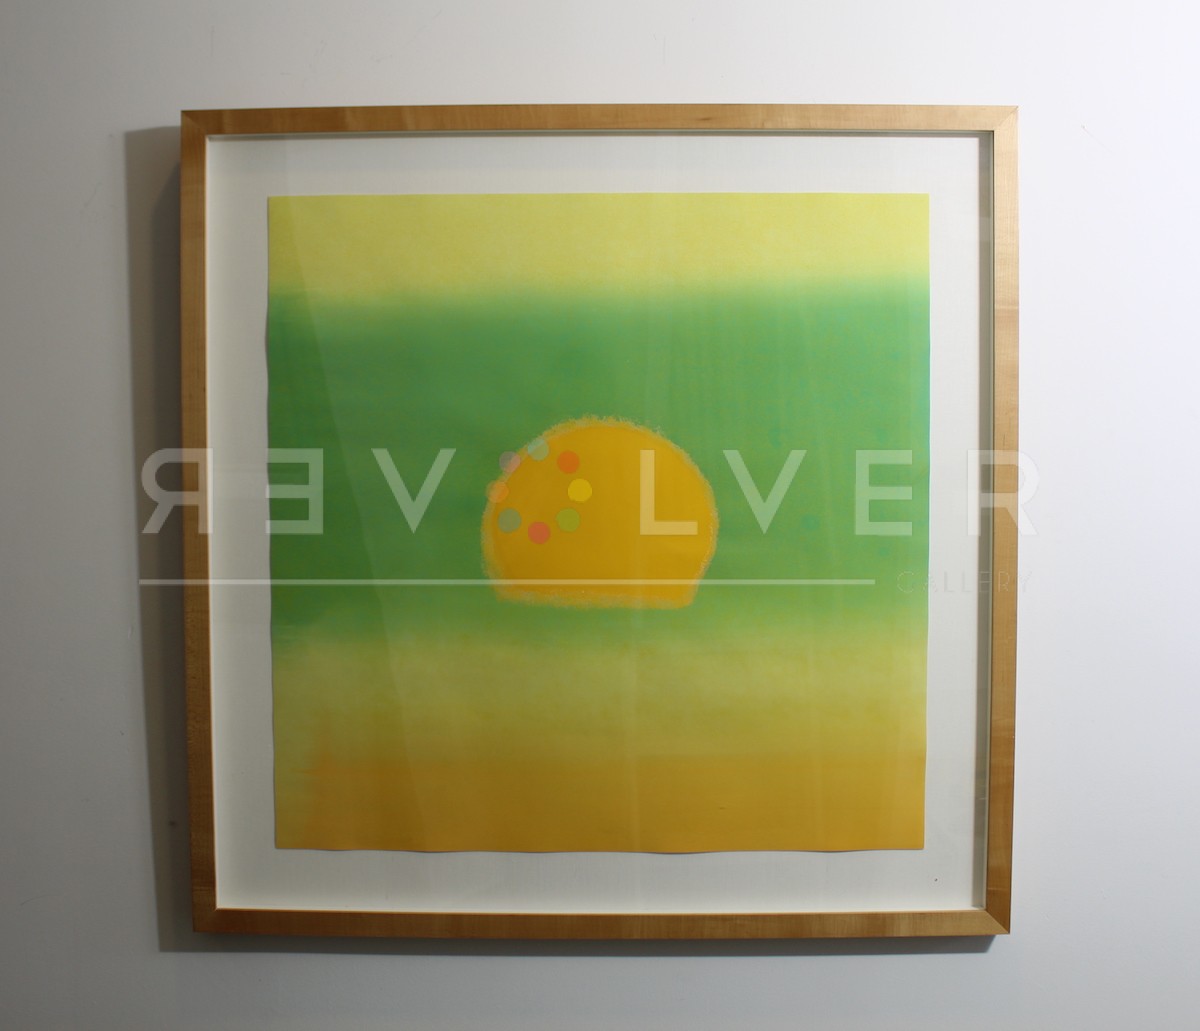 Andy Warhol Sunset (Yellow/Green) framed and hanging on the gallery wall.